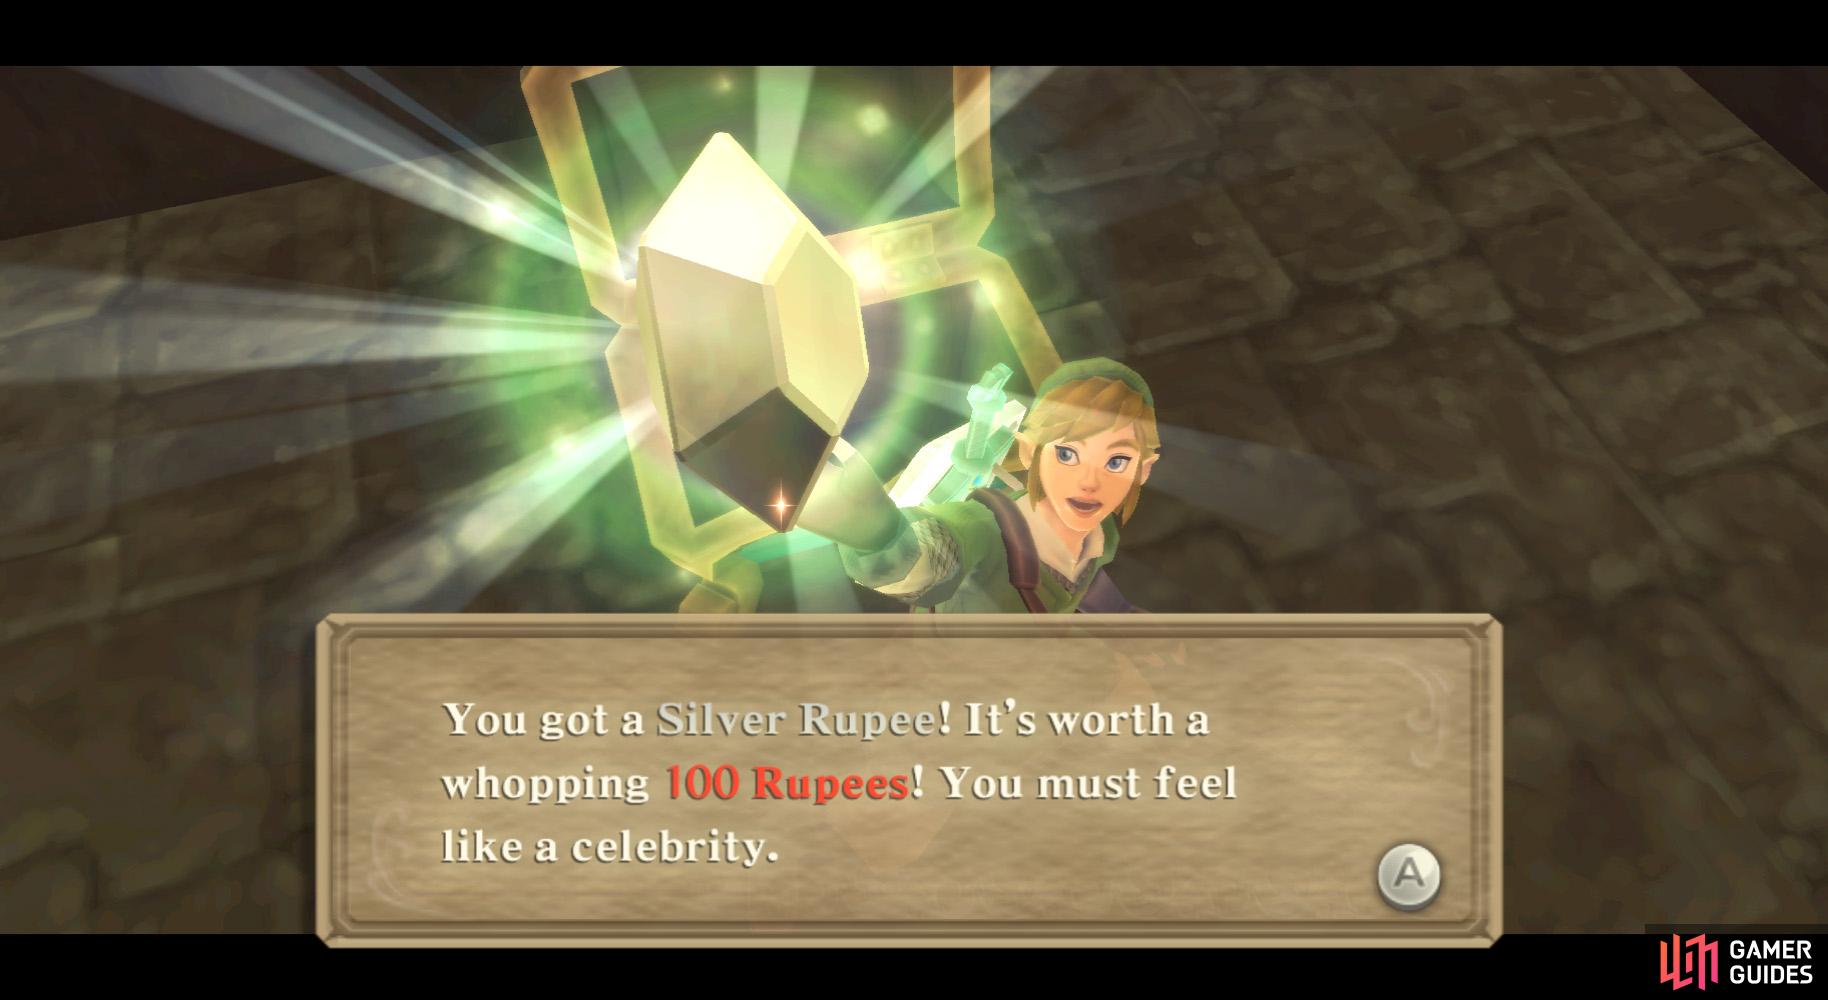 Have you thought of what to spend these rupees on yet?